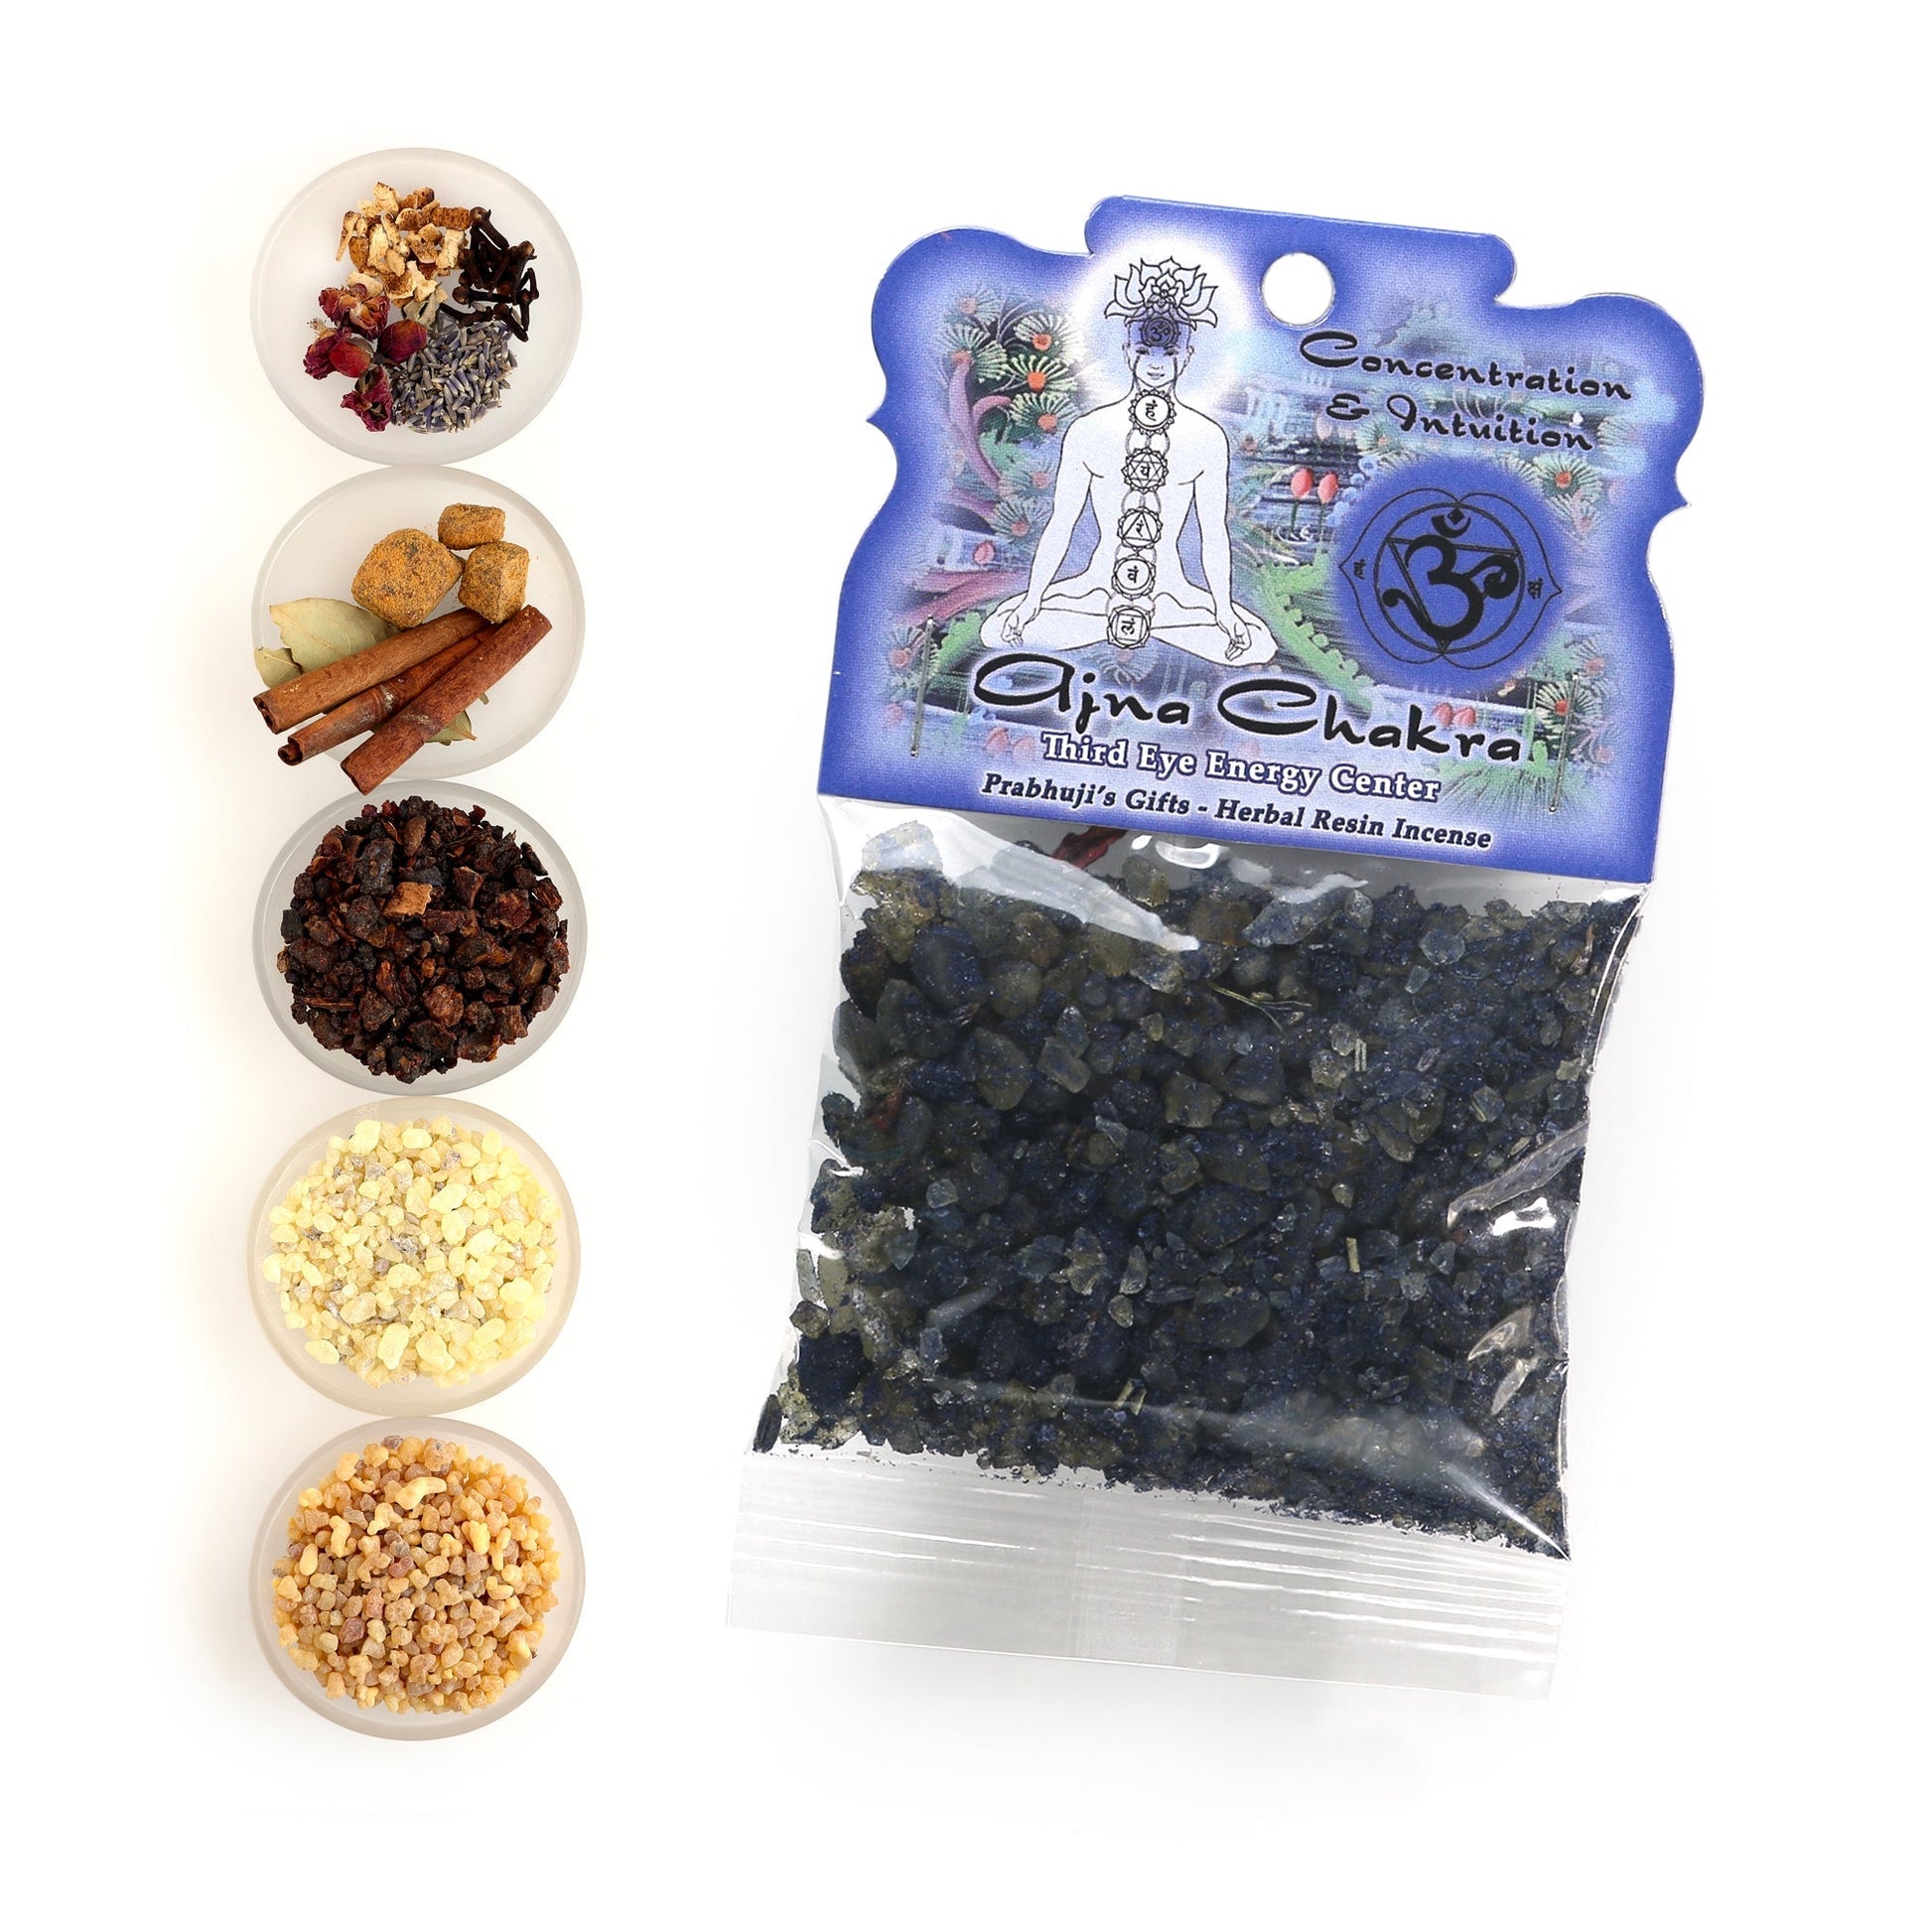 Resin Incense Third Eye Chakra Ajna - Concentration and Intuition - 1.2oz bag - Tree Spirit Wellness